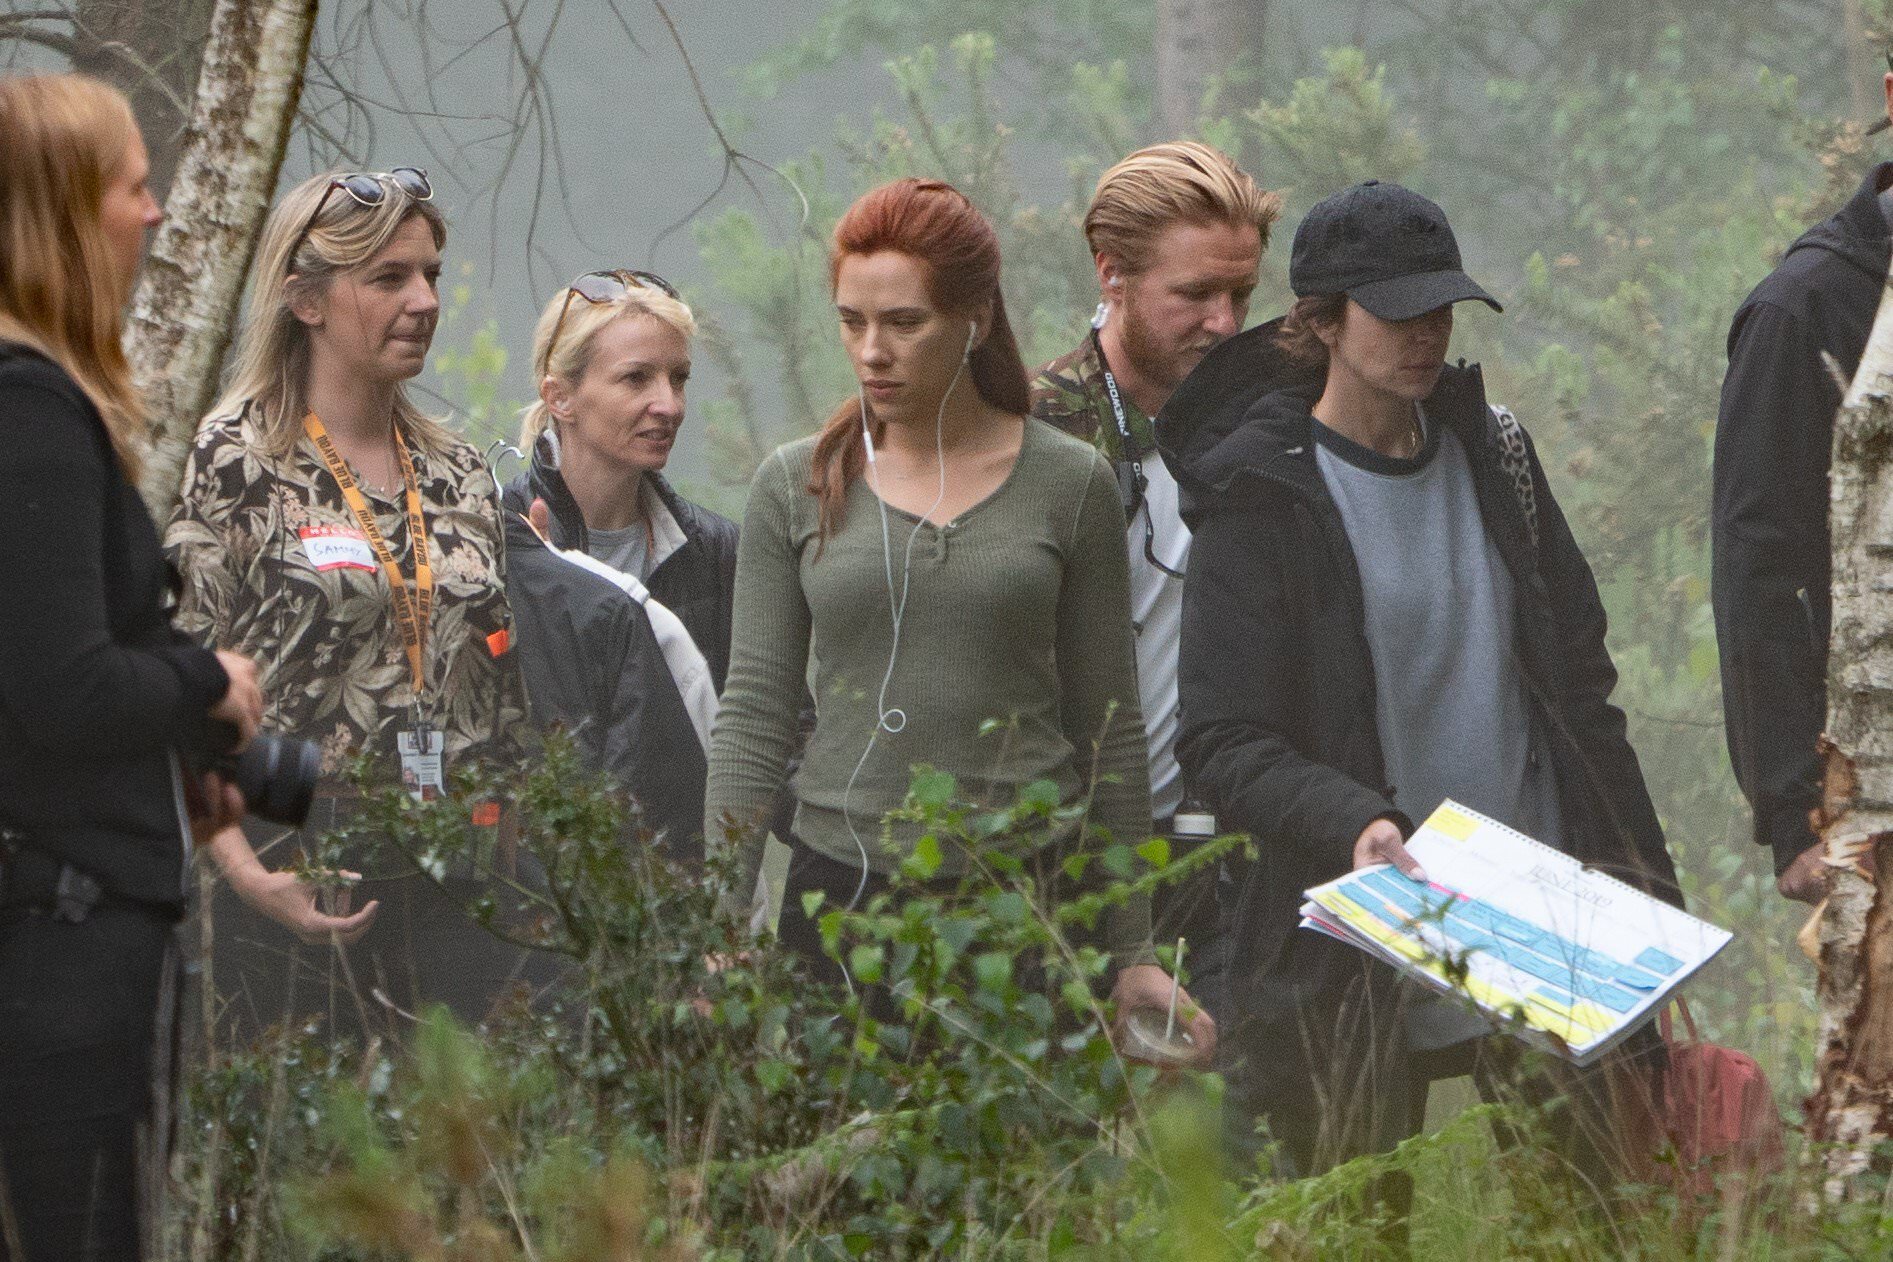 Scarlett Johansson From The Sets Of Black Widow At Pinewood Studios